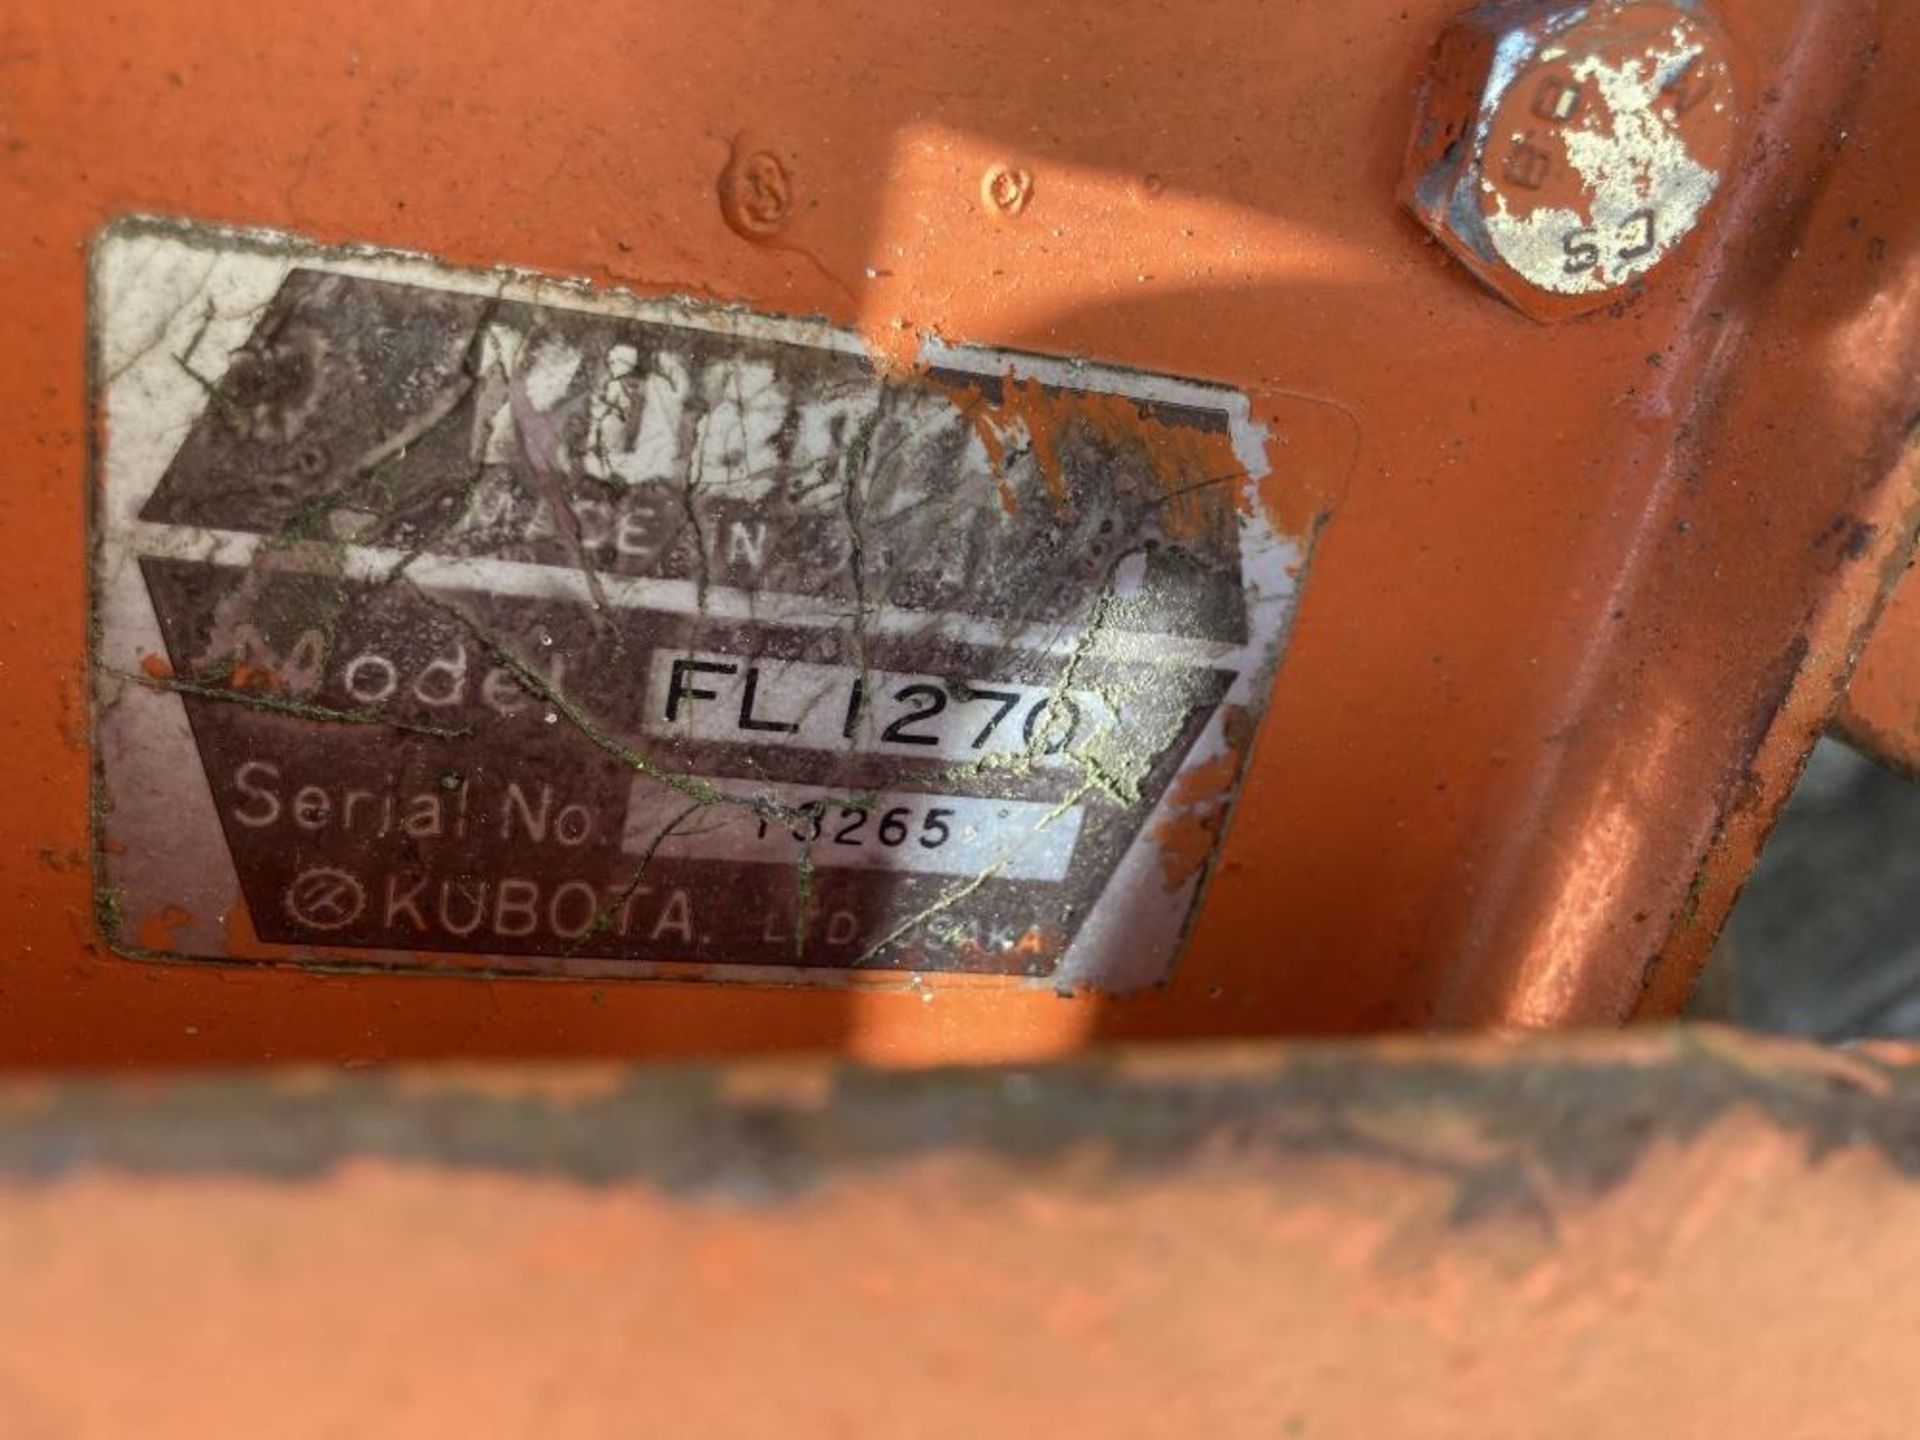 Kubota FL1270 Rotary Tiller Compact Tractor Implement - Image 7 of 7